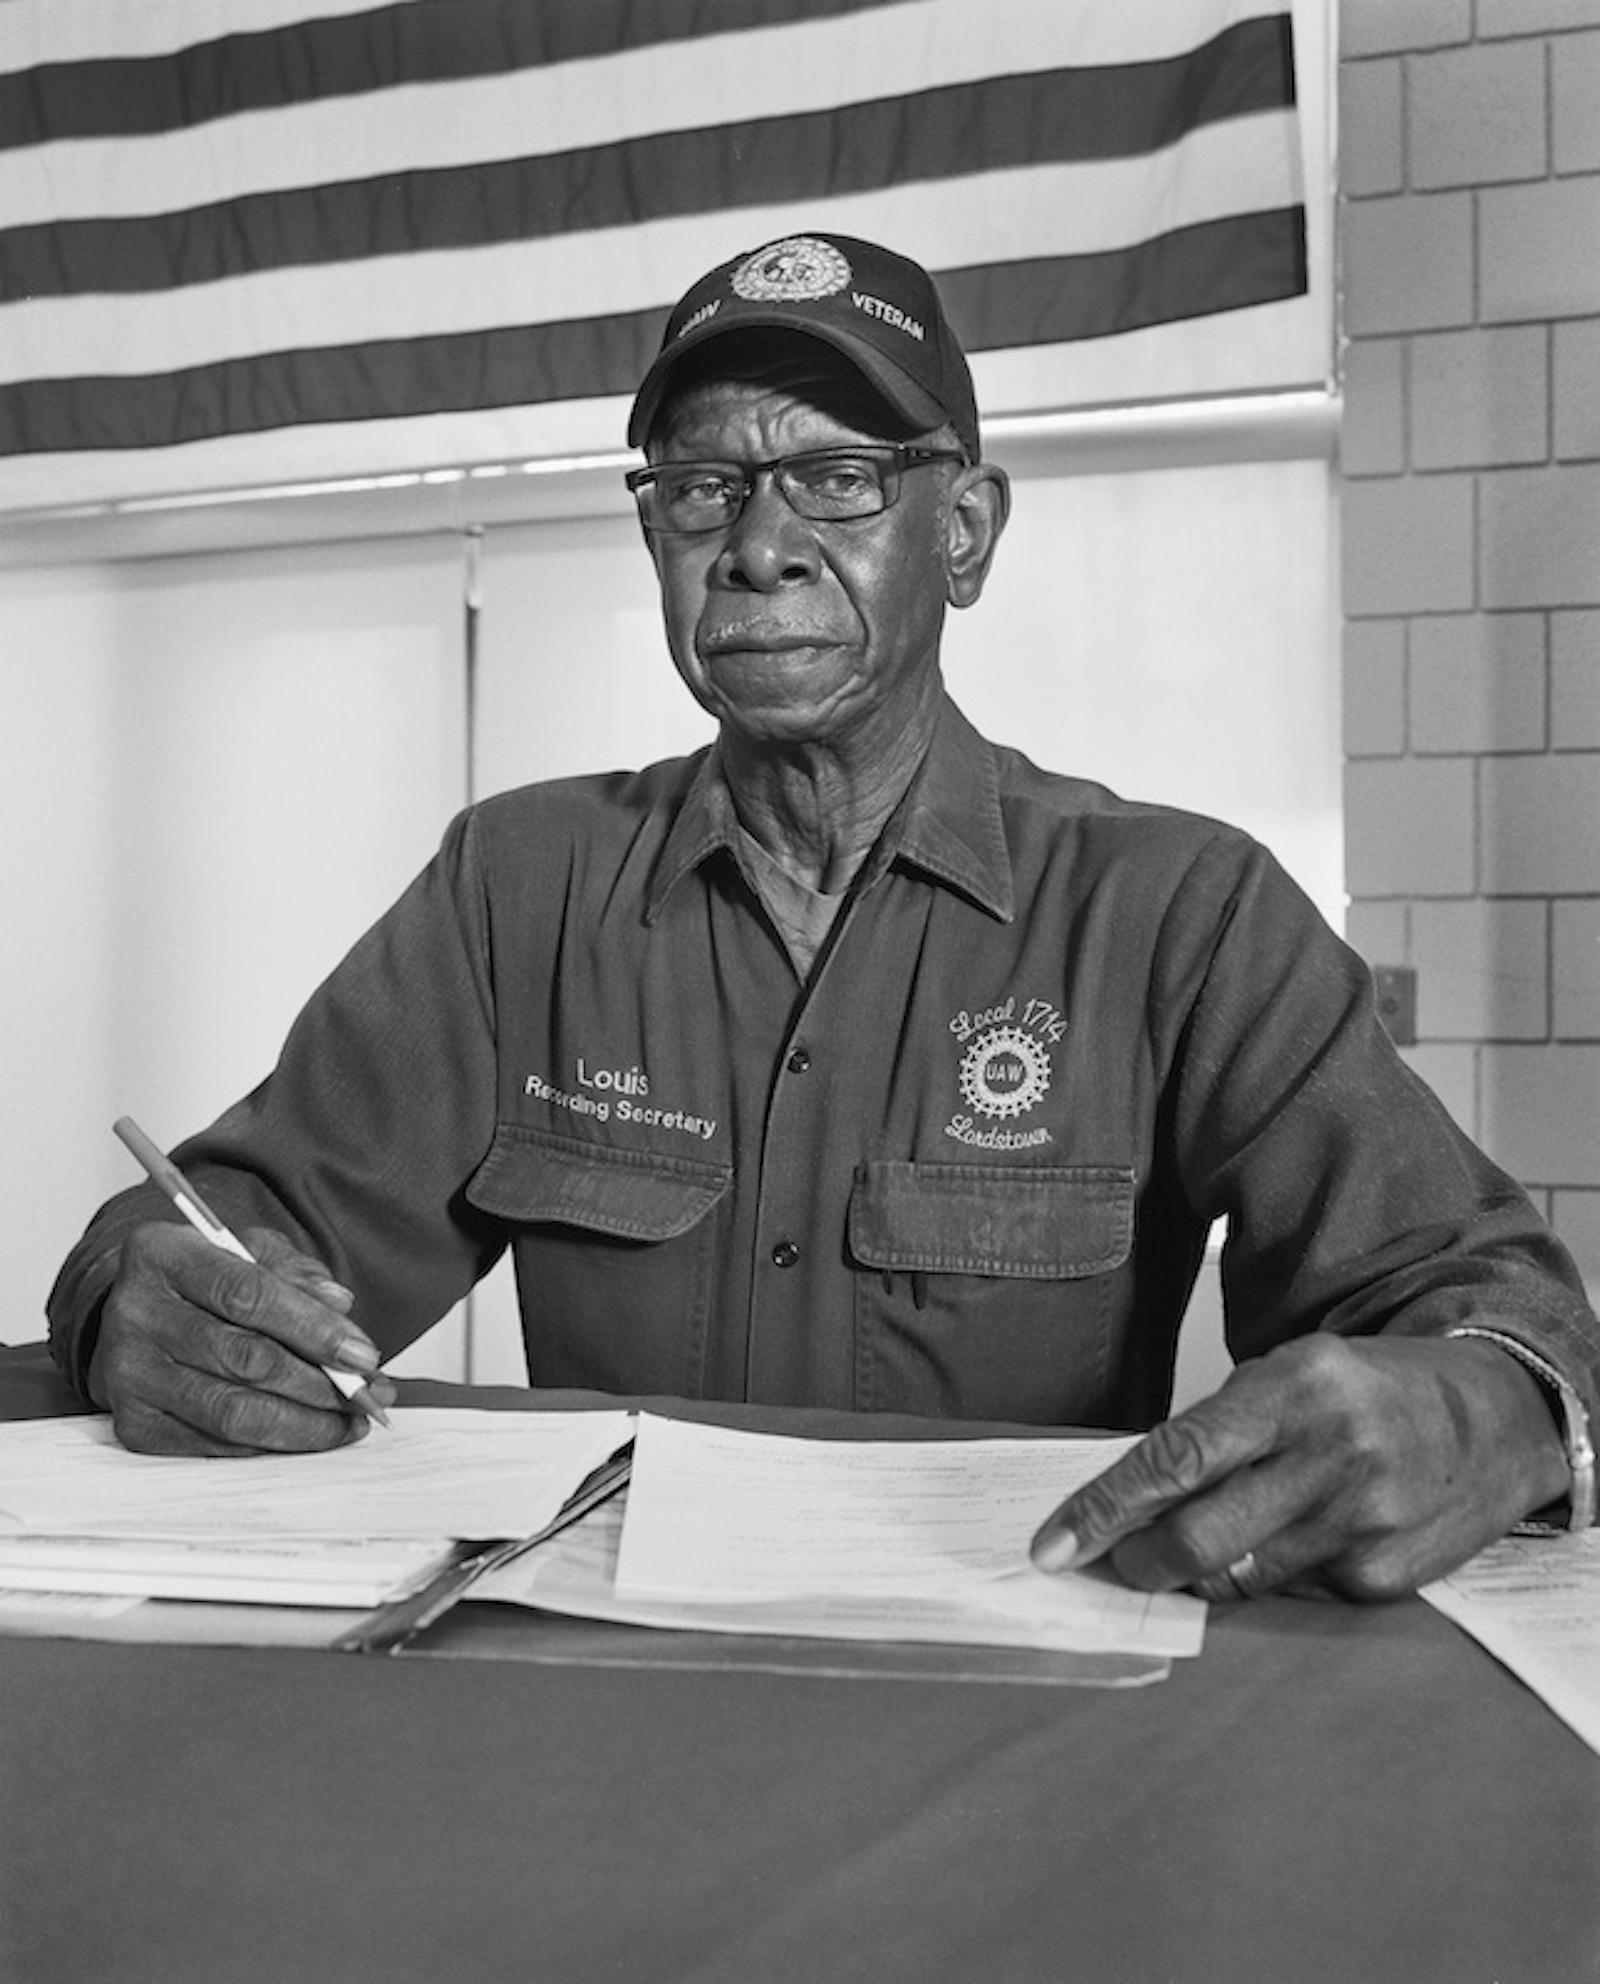 A black and white photo of a man in a uniform sitting at a desk with paperwork